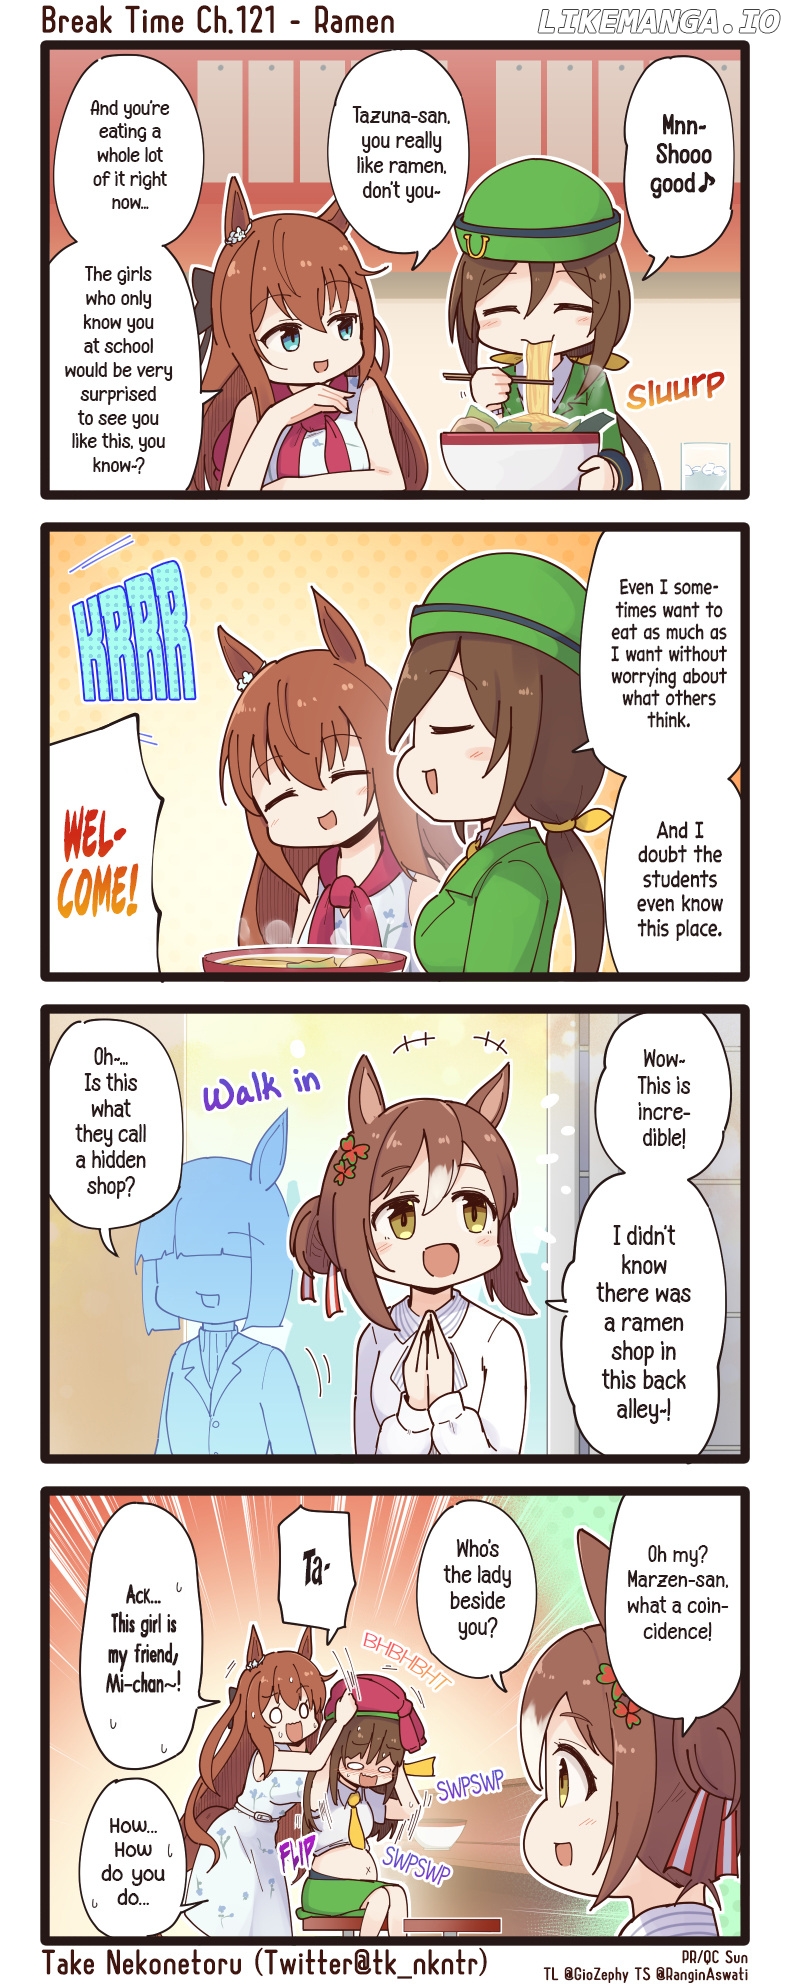 Uma Musume - Break Time chapter 121 - page 1